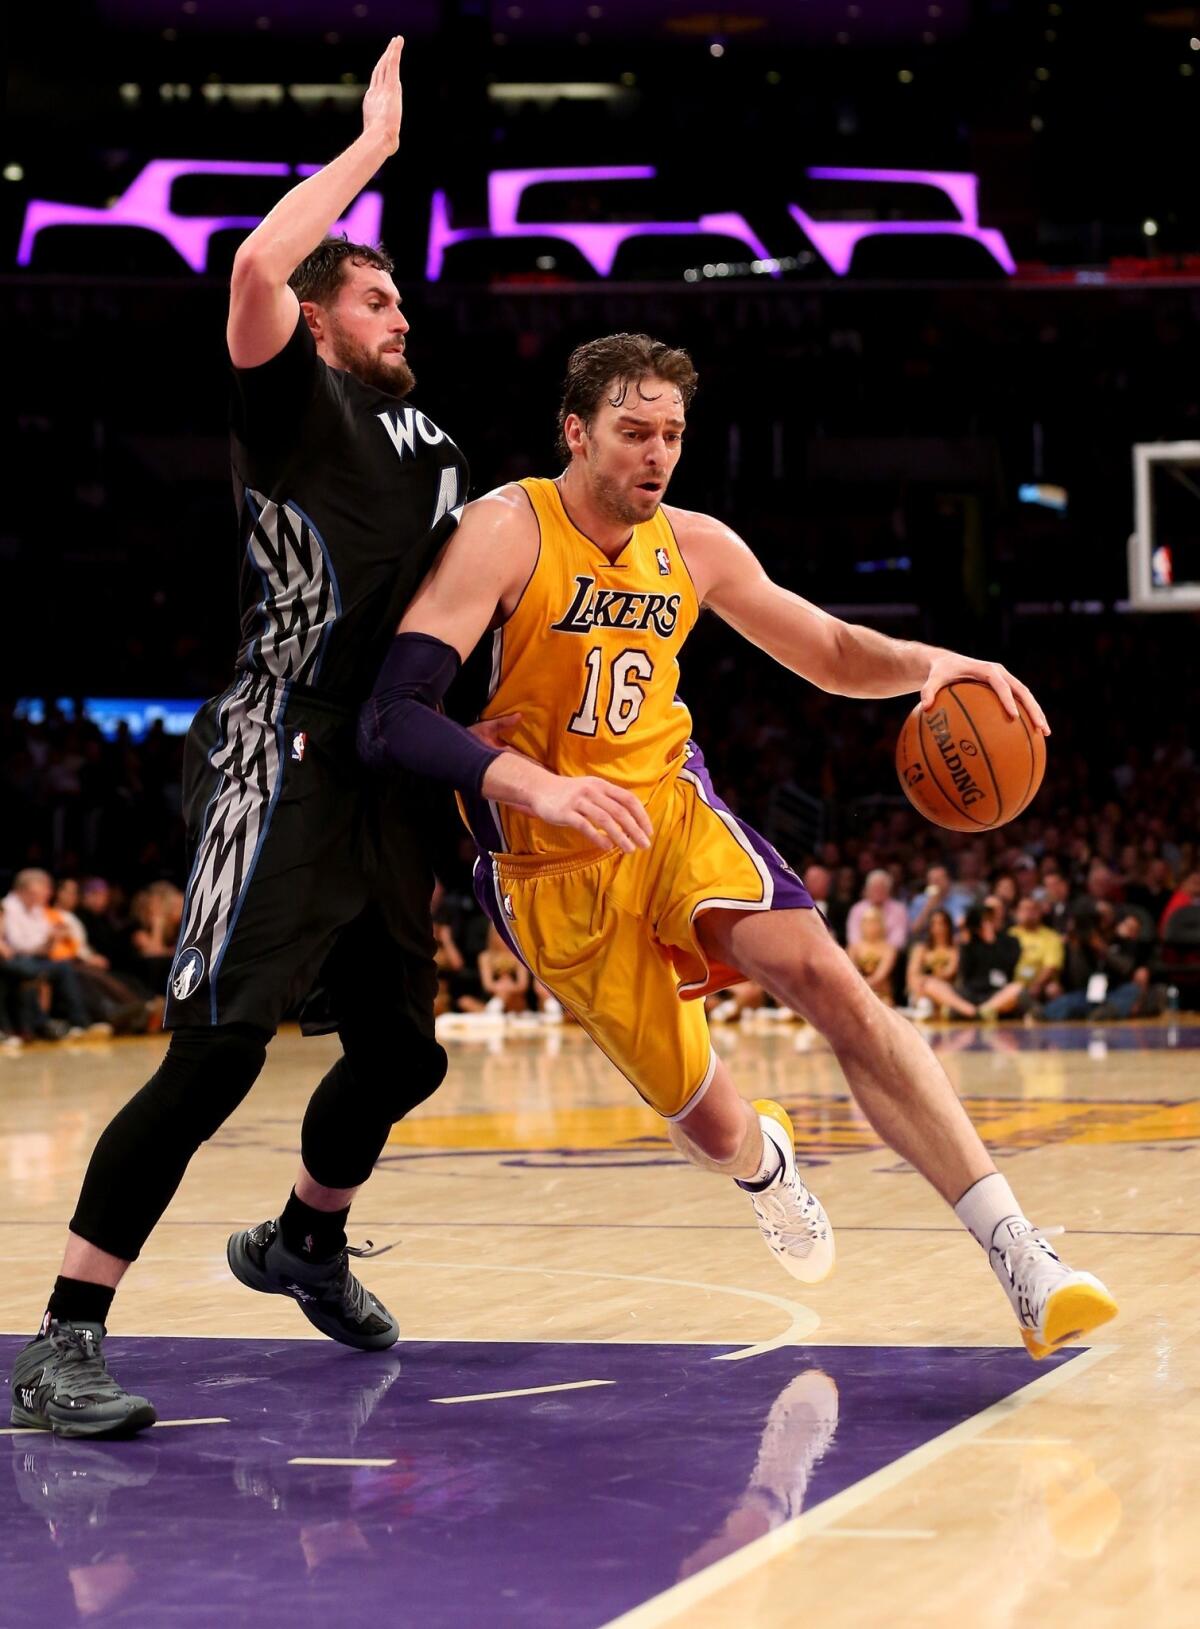 Lakers center Pau Gasol, right, drives around Minnesota Timberwolves forward Kevin Love during the Lakers' 104-91 win Friday. Gasol will not play in Saturday's game against the Golden State Warriors because of an upper respiratory infection.